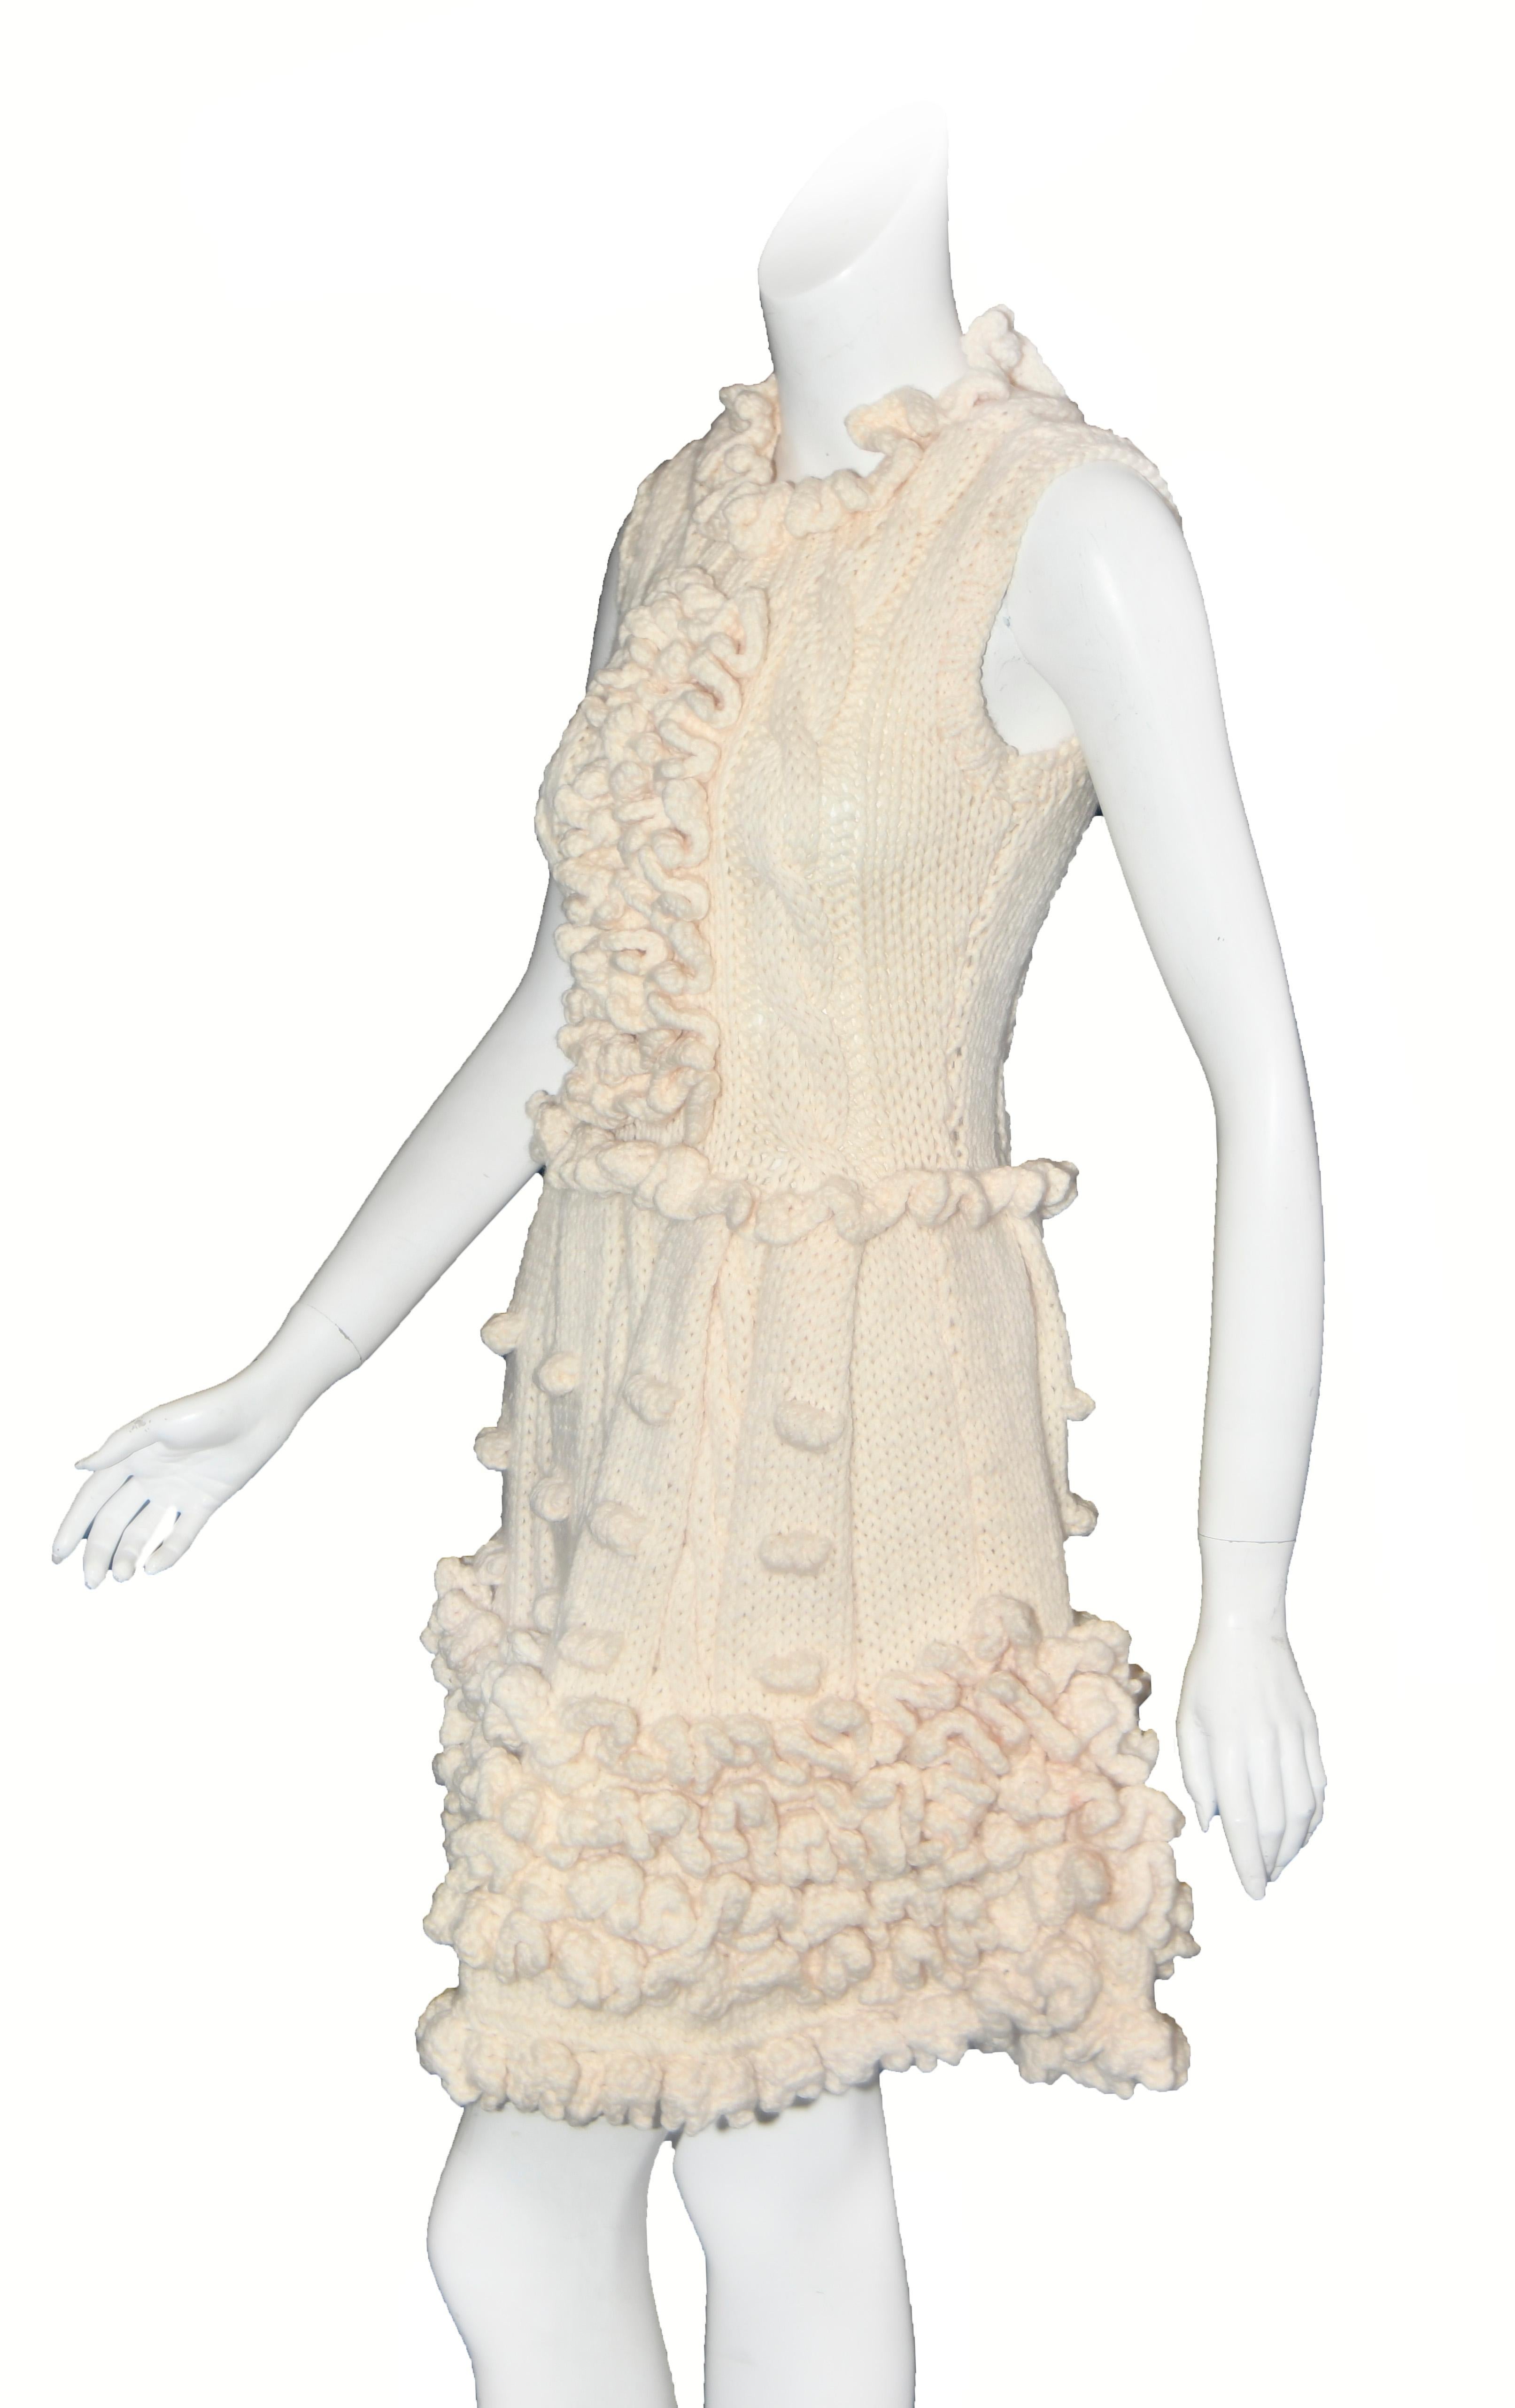 Miu Miu ivory handmade virgin wool crochet dress is a burst of ruffles everywhere!  This 2014 runway dress integrates the layers of ruffles beautifully, beginning with the crocheted ruffle collar then continuing with the ruffles down the front of